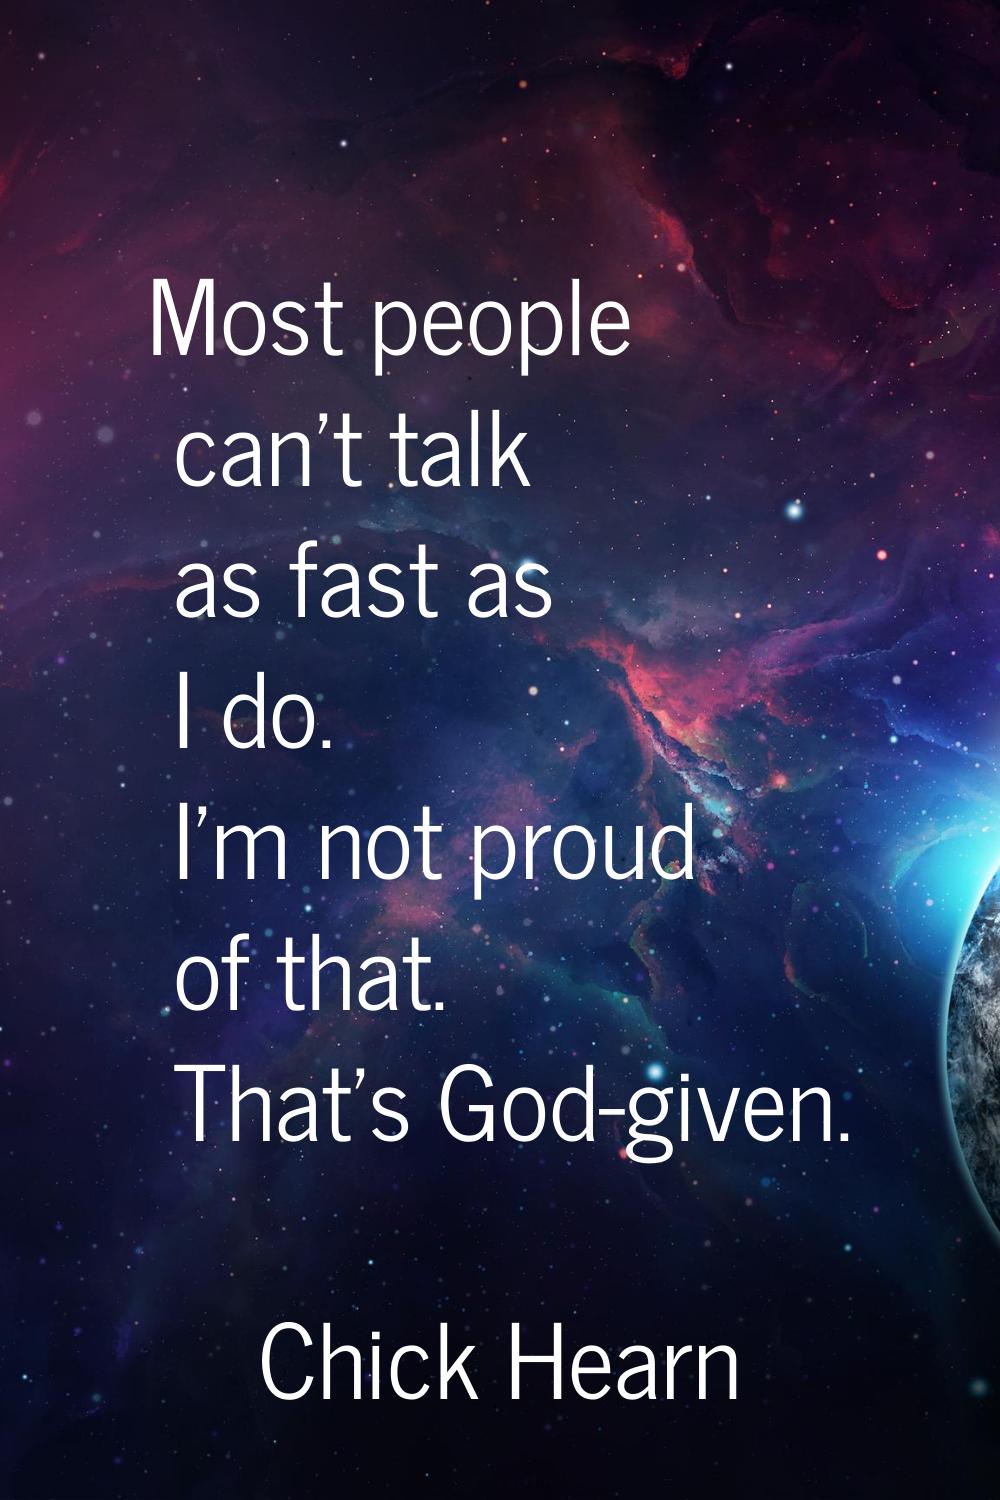 Most people can't talk as fast as I do. I'm not proud of that. That's God-given.